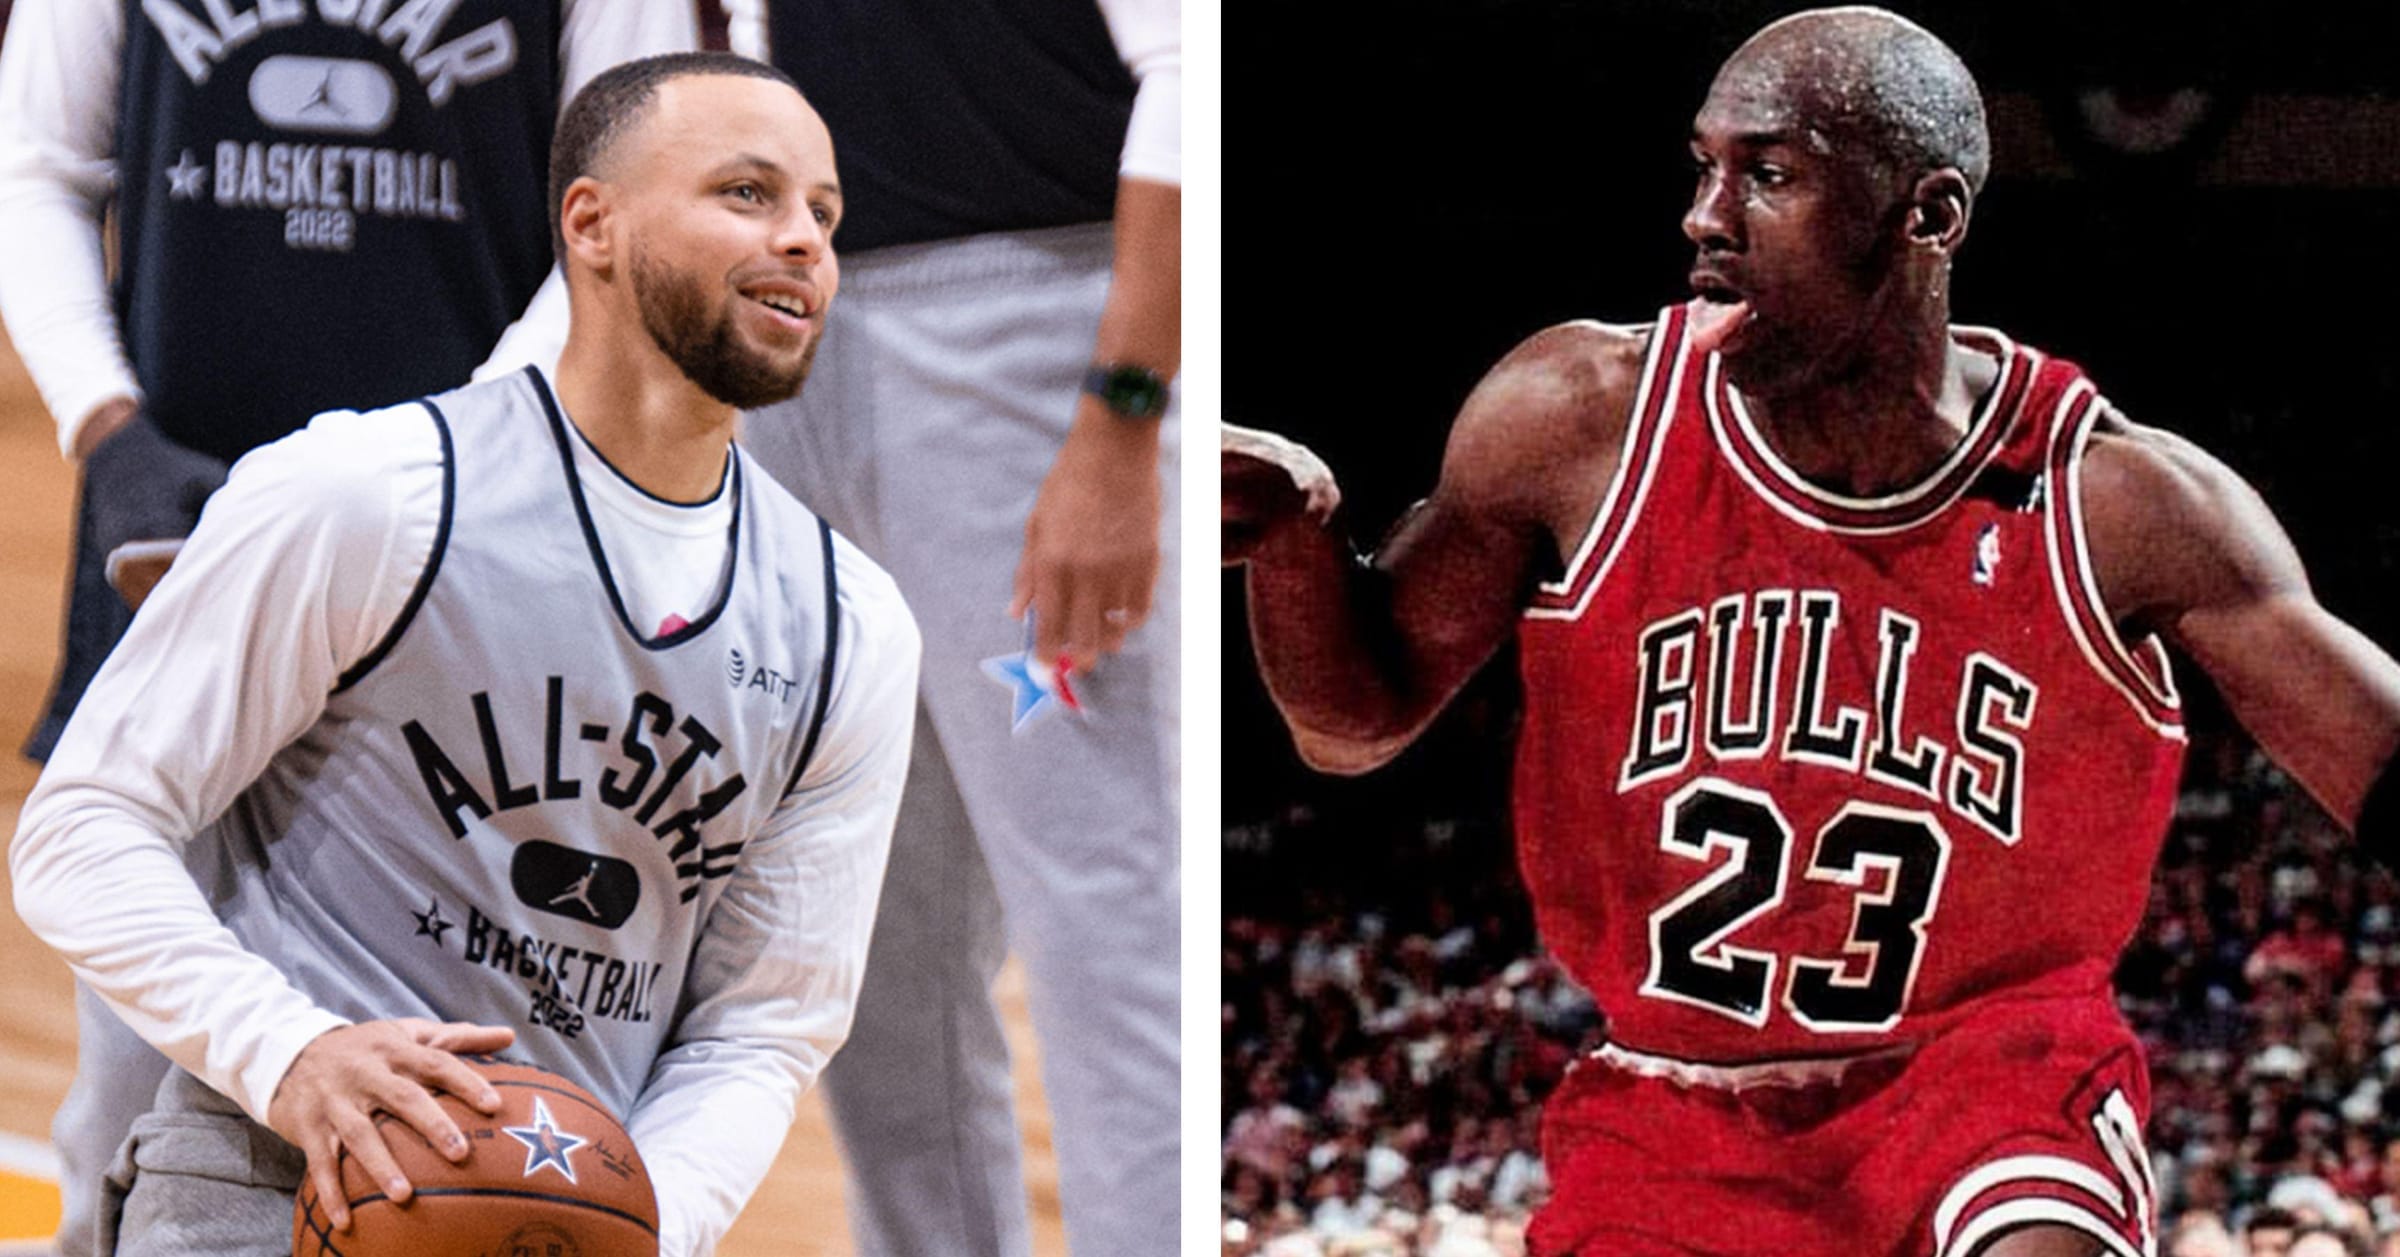 Top 5 Best Players Of All-Time At Each Position - Fadeaway World